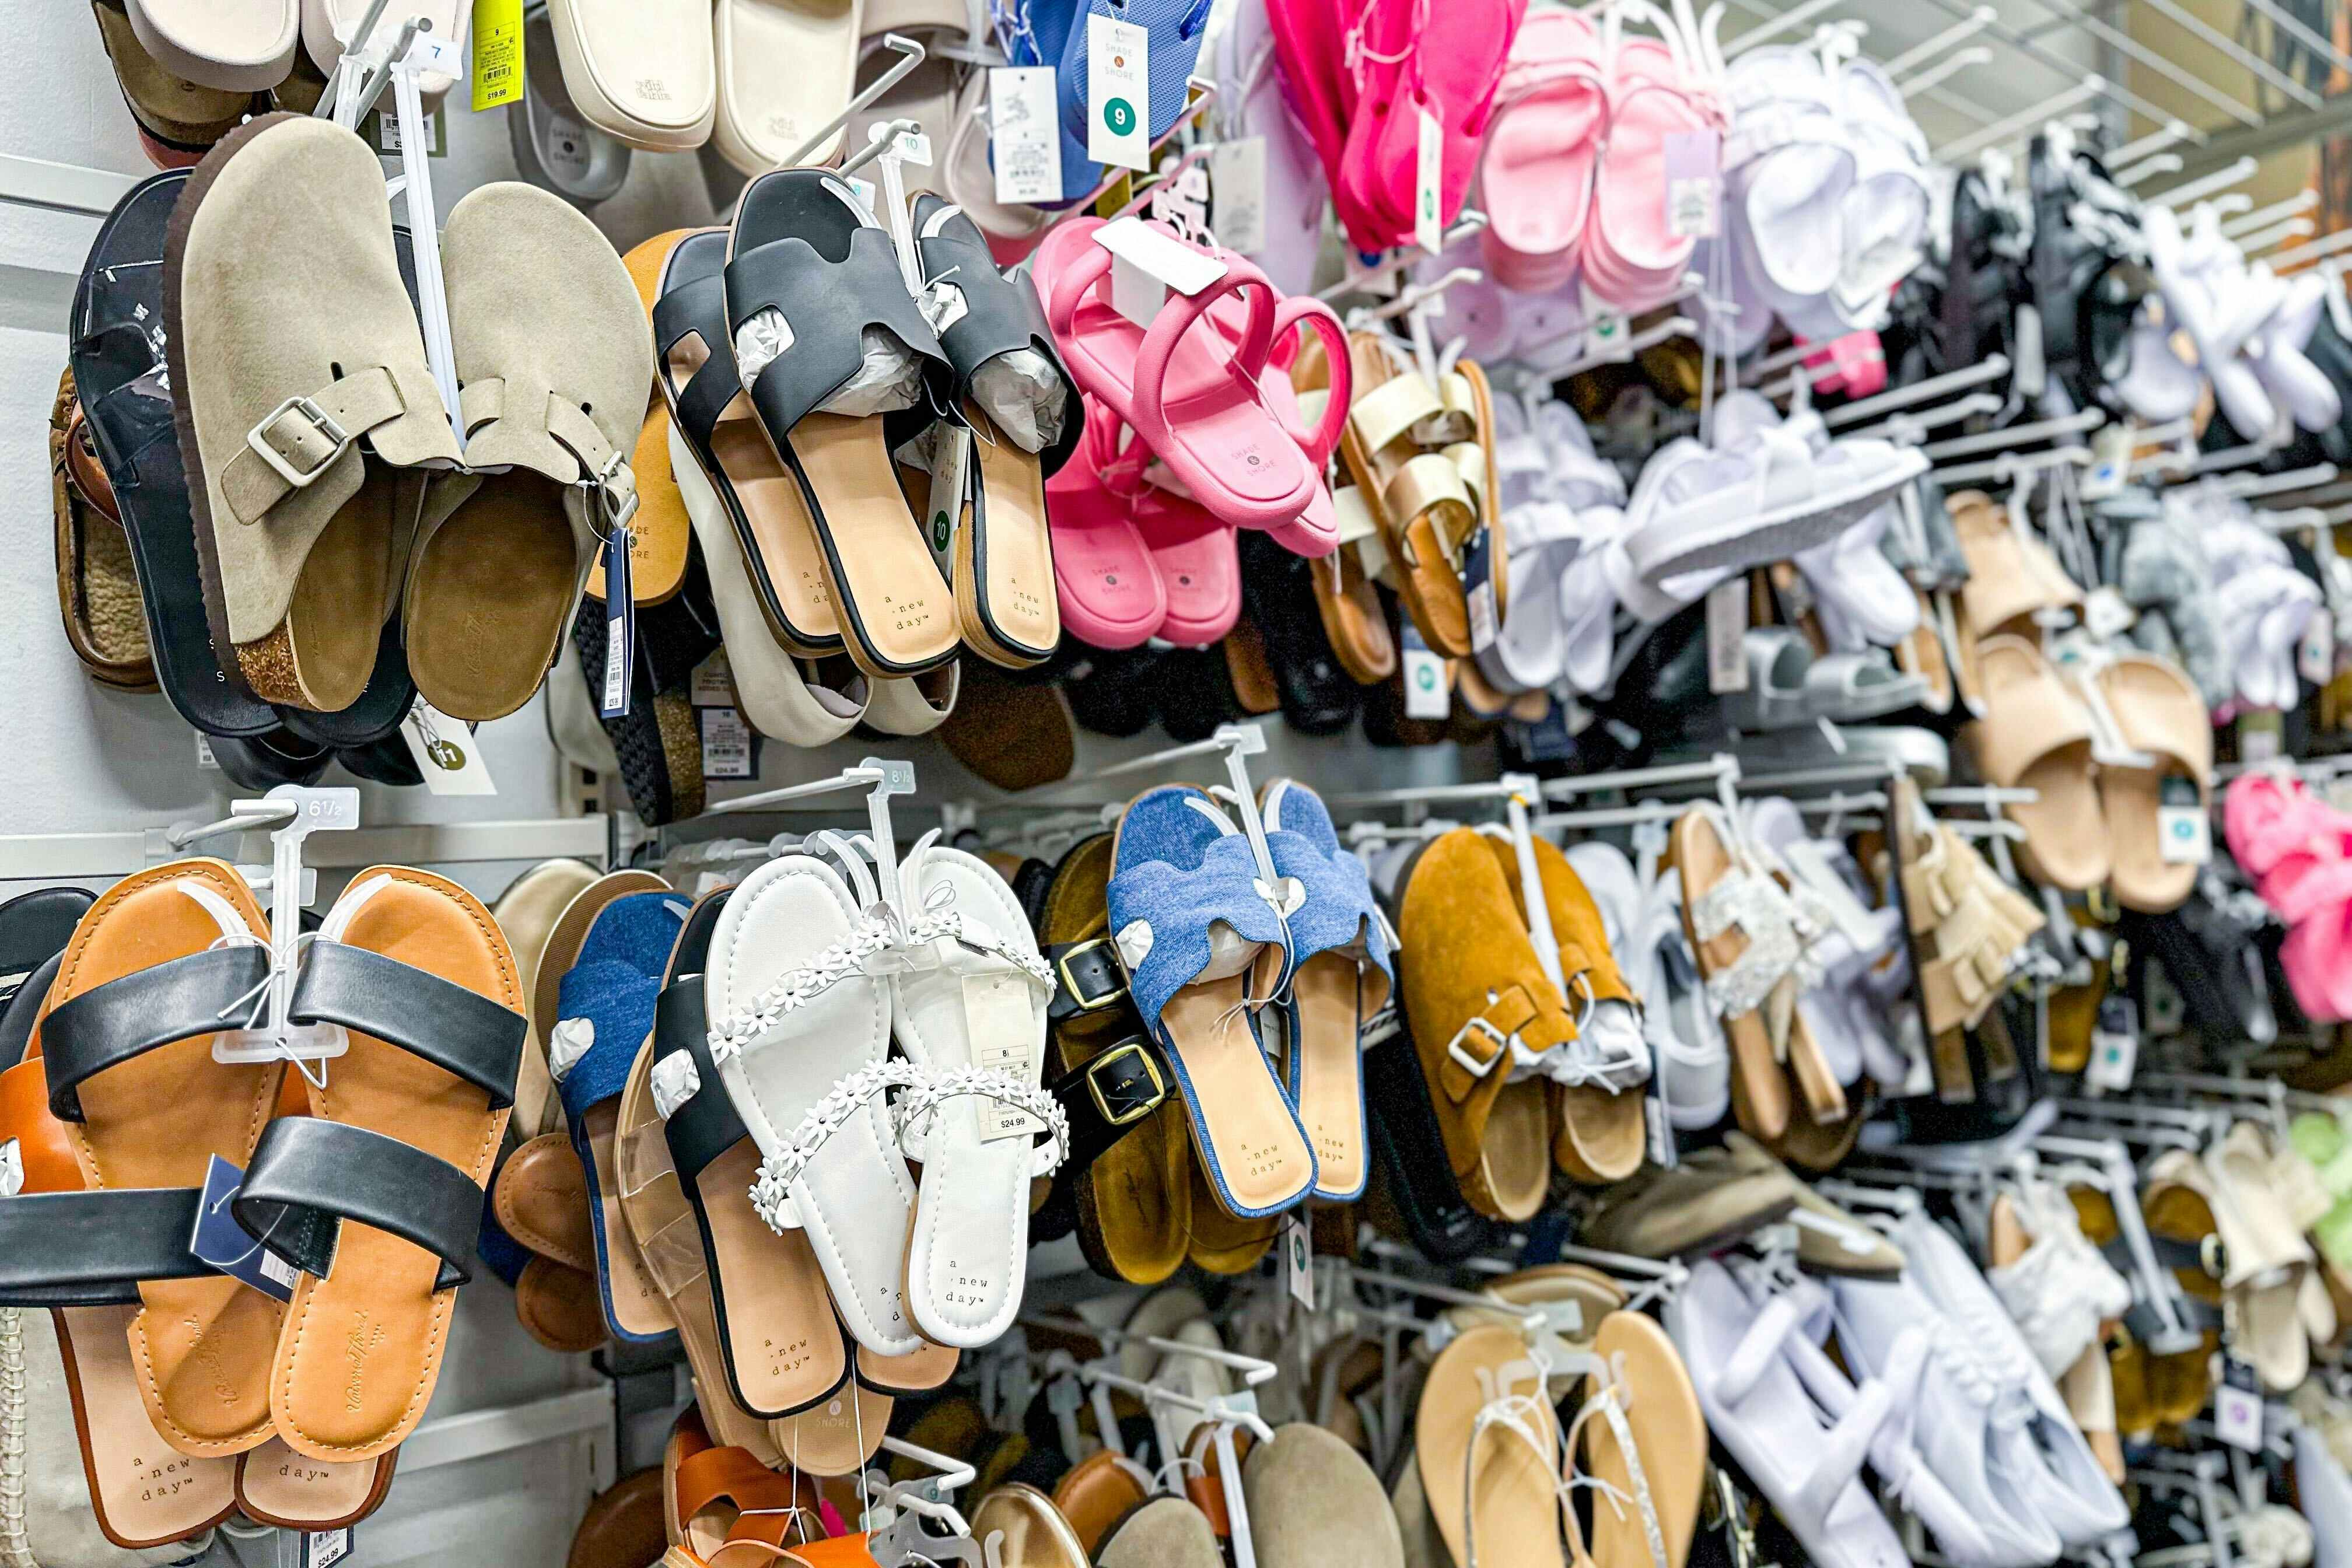 Women's Shoes Sale at Target: $3.80 Sandals and Sneakers for $11.39